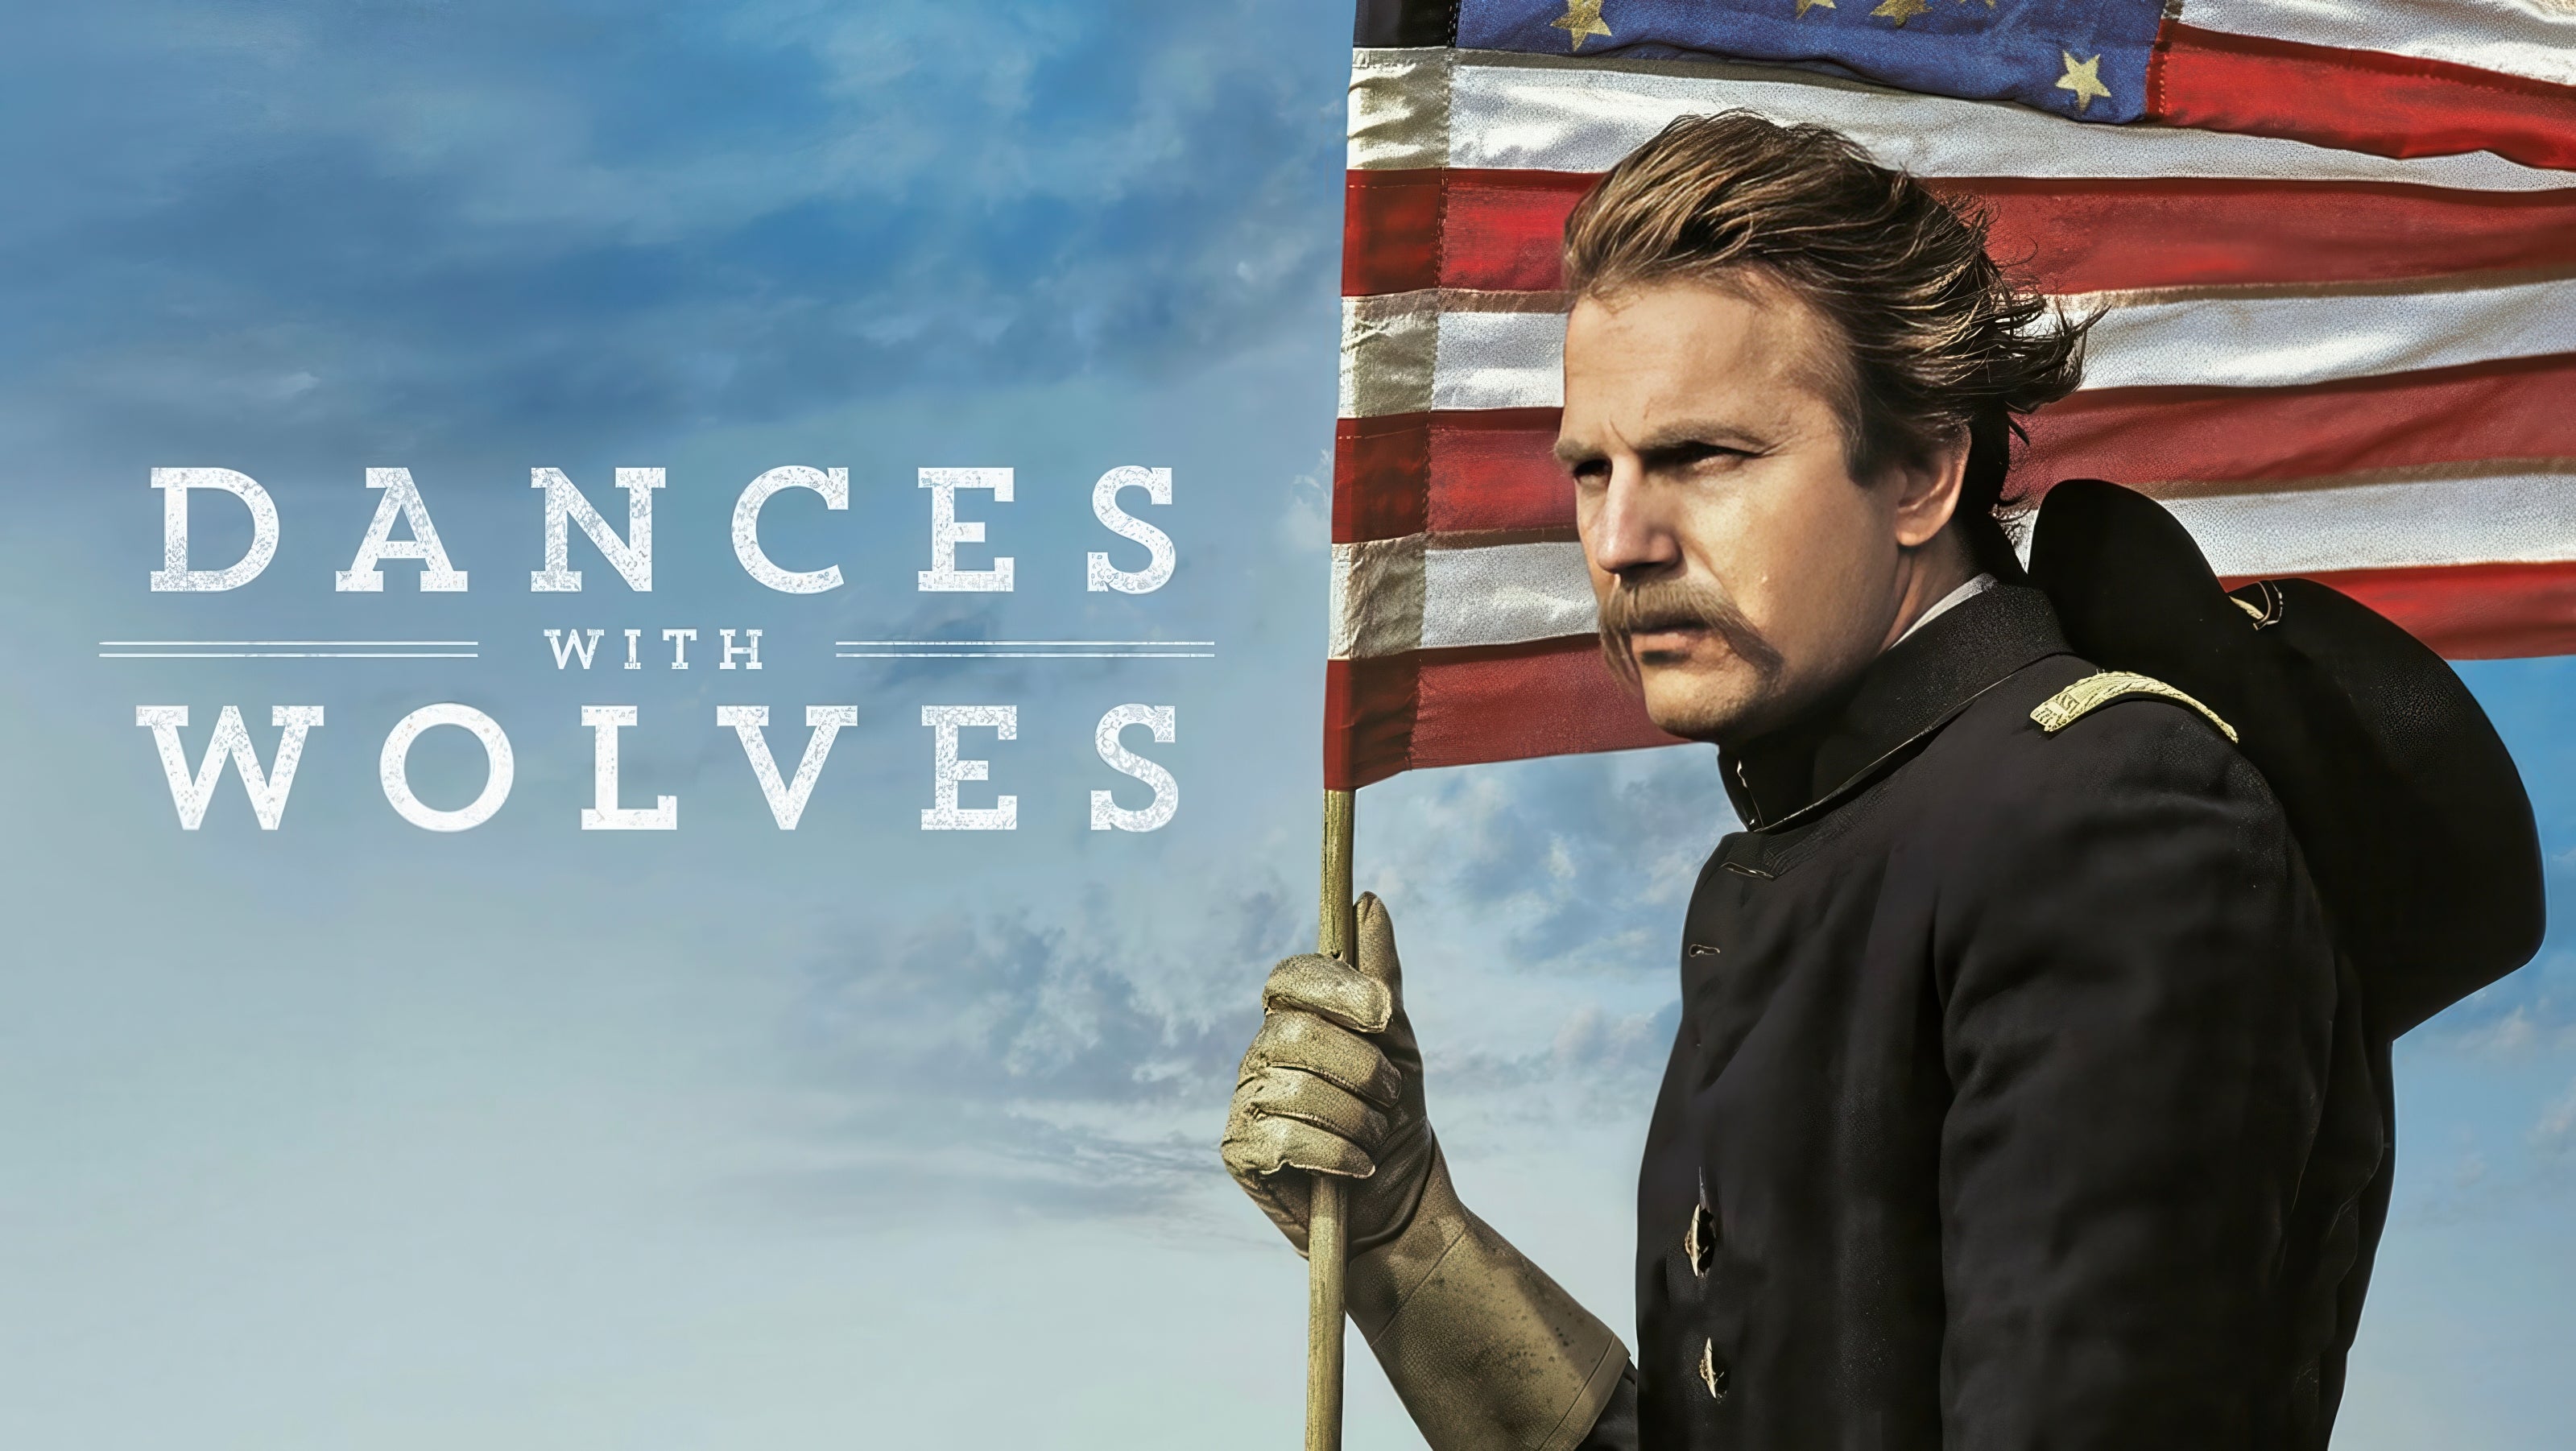 Dances with Wolves - Script - Image of Movie Film Poster